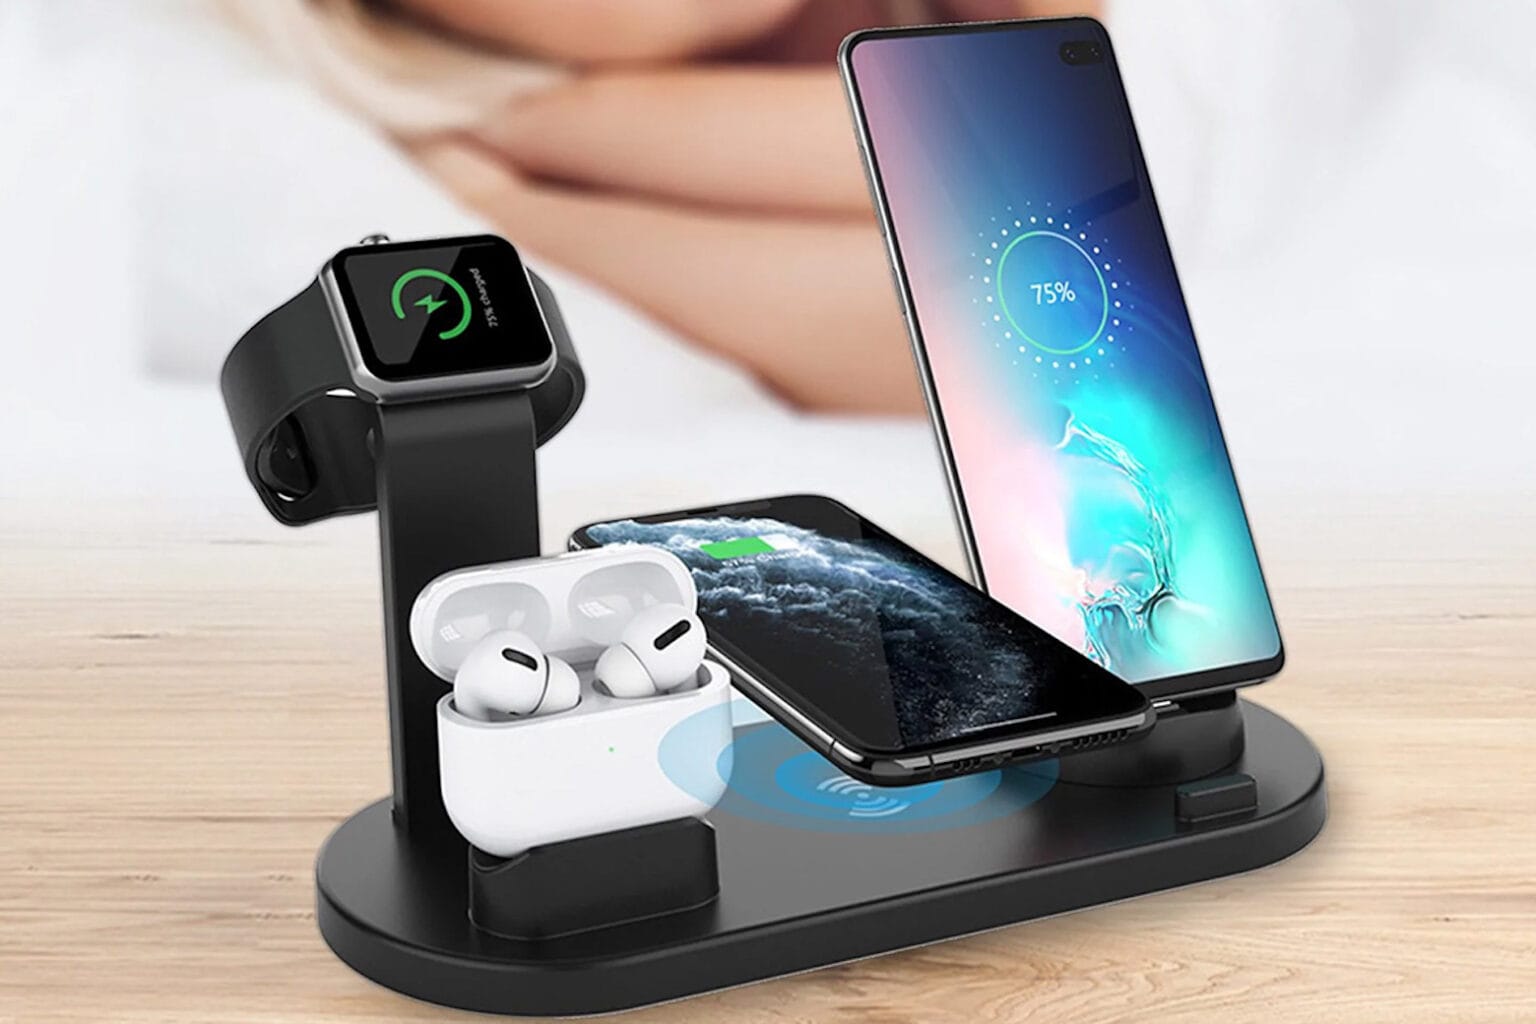 Get $50 off this stylish 6-in-1 charging station in the Father’s Day sale.